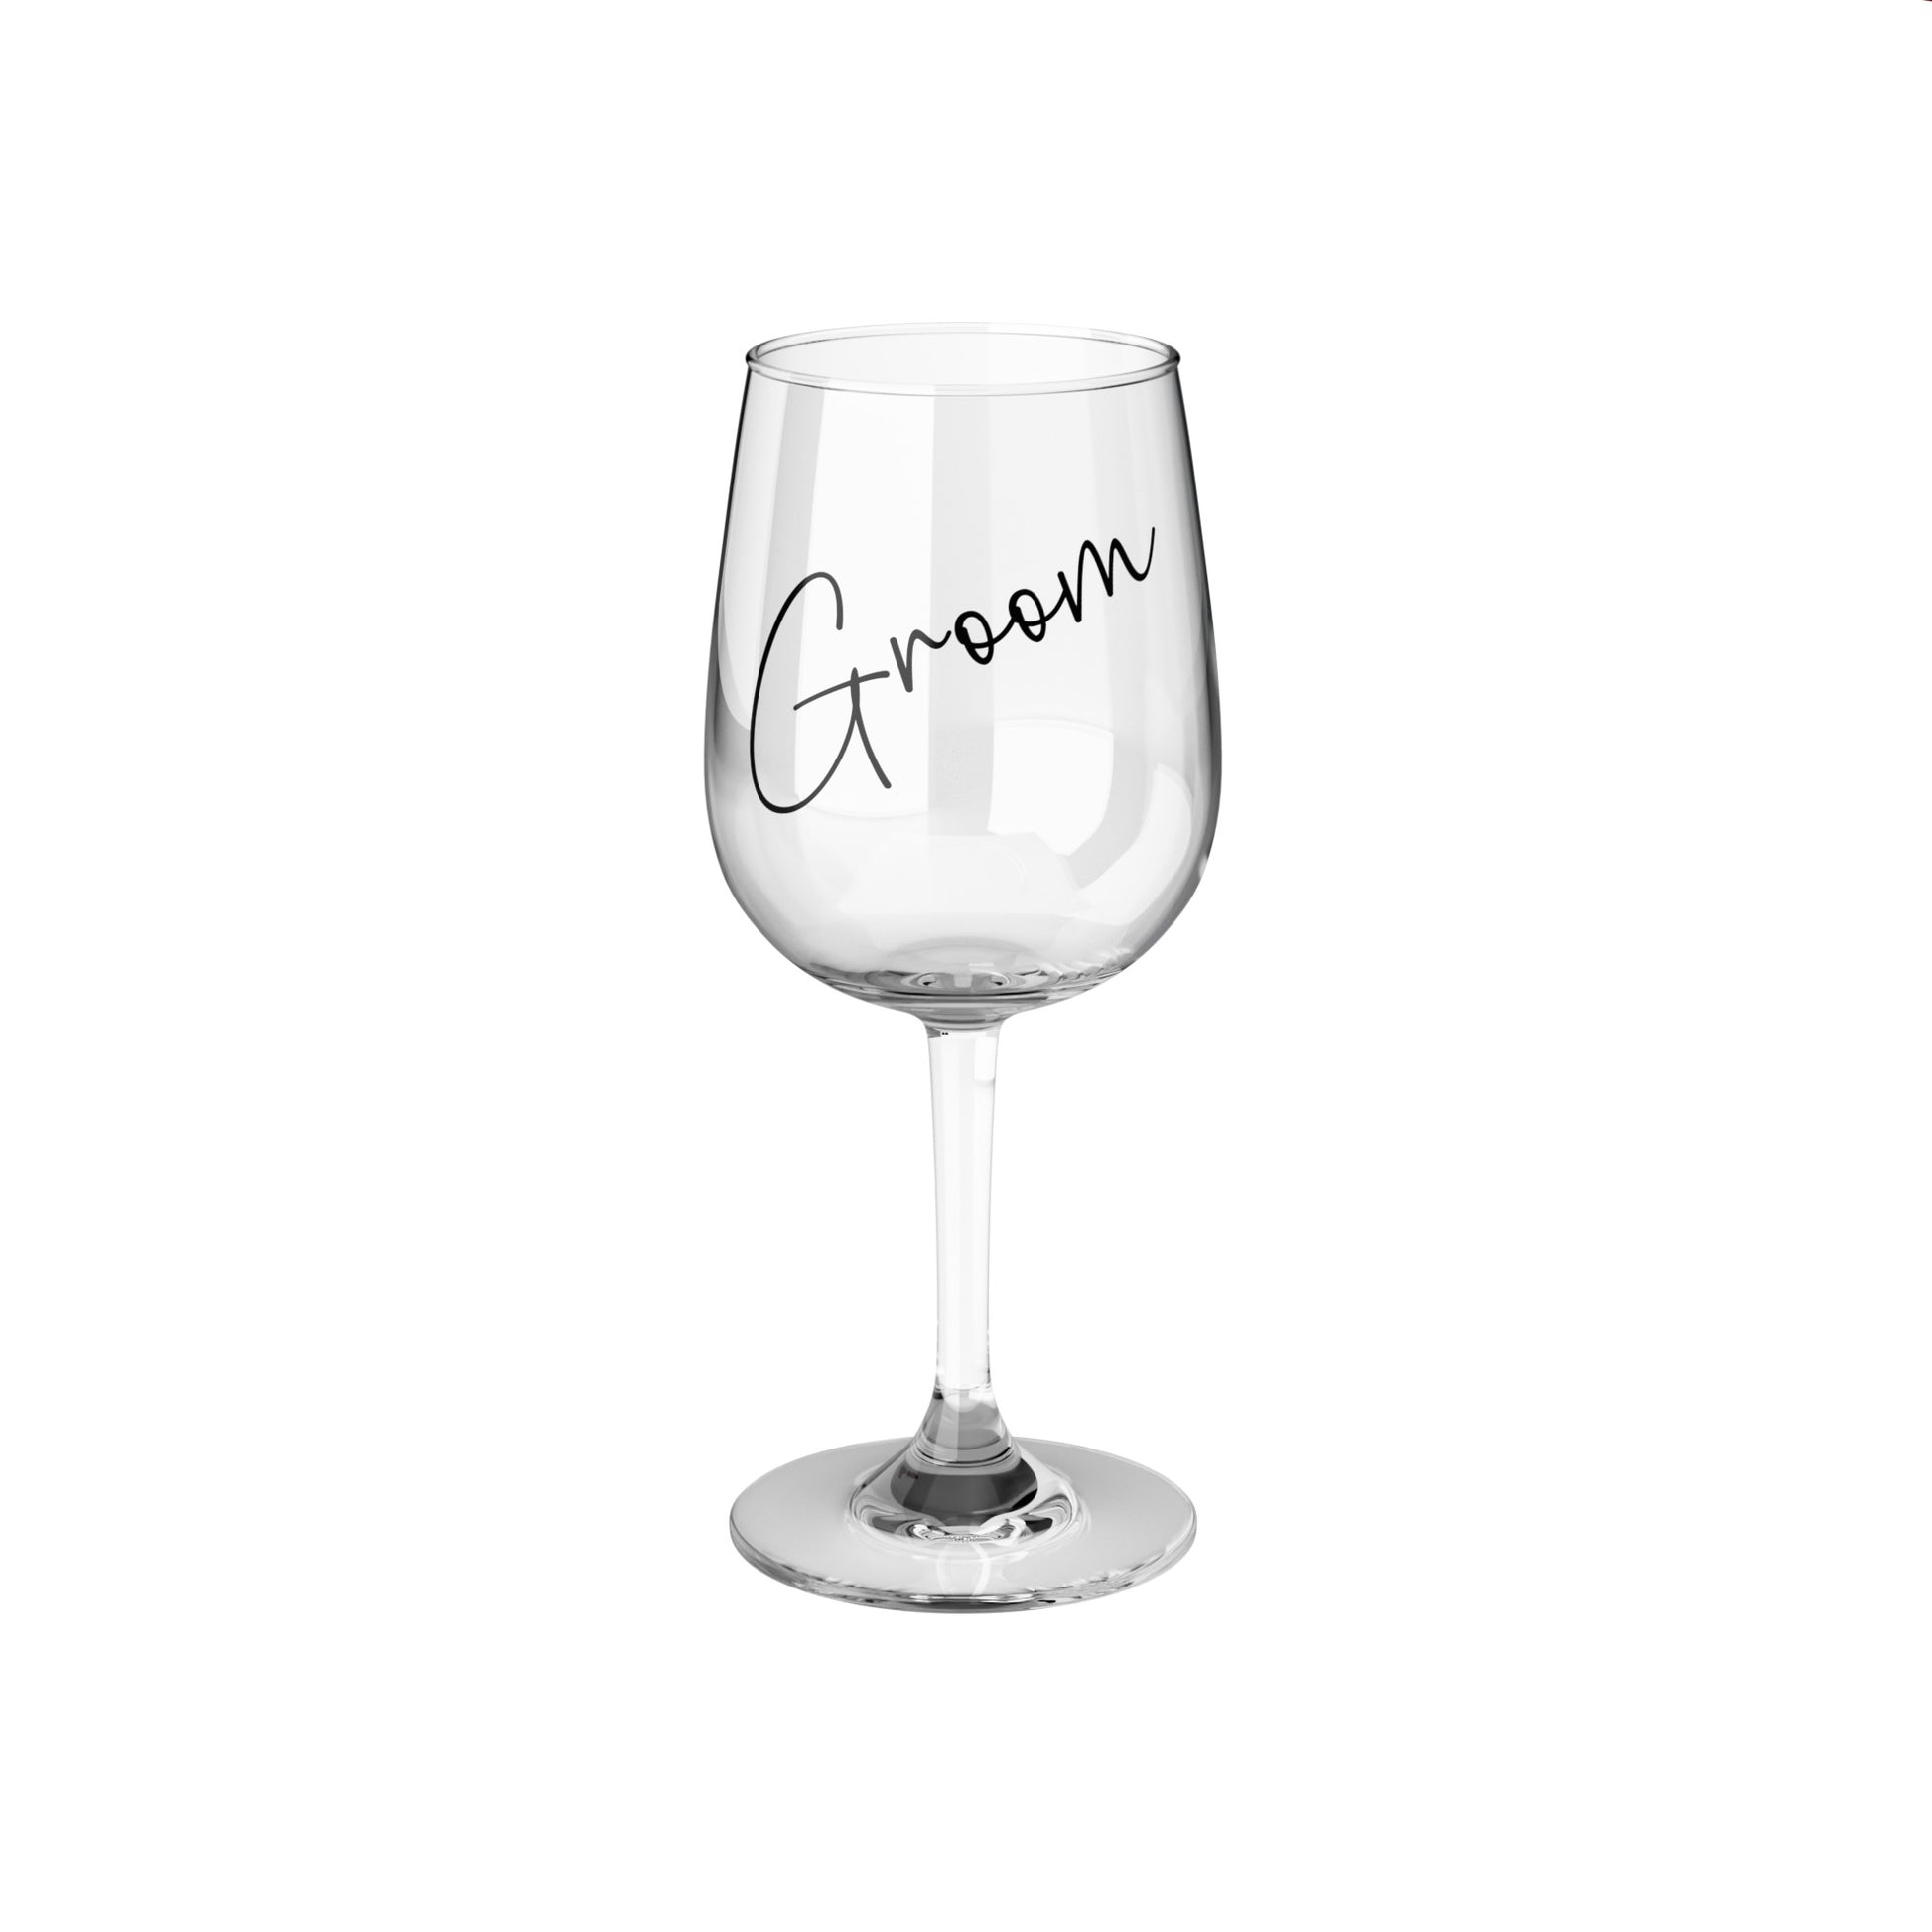 Wedding wine glass for groom, front view.